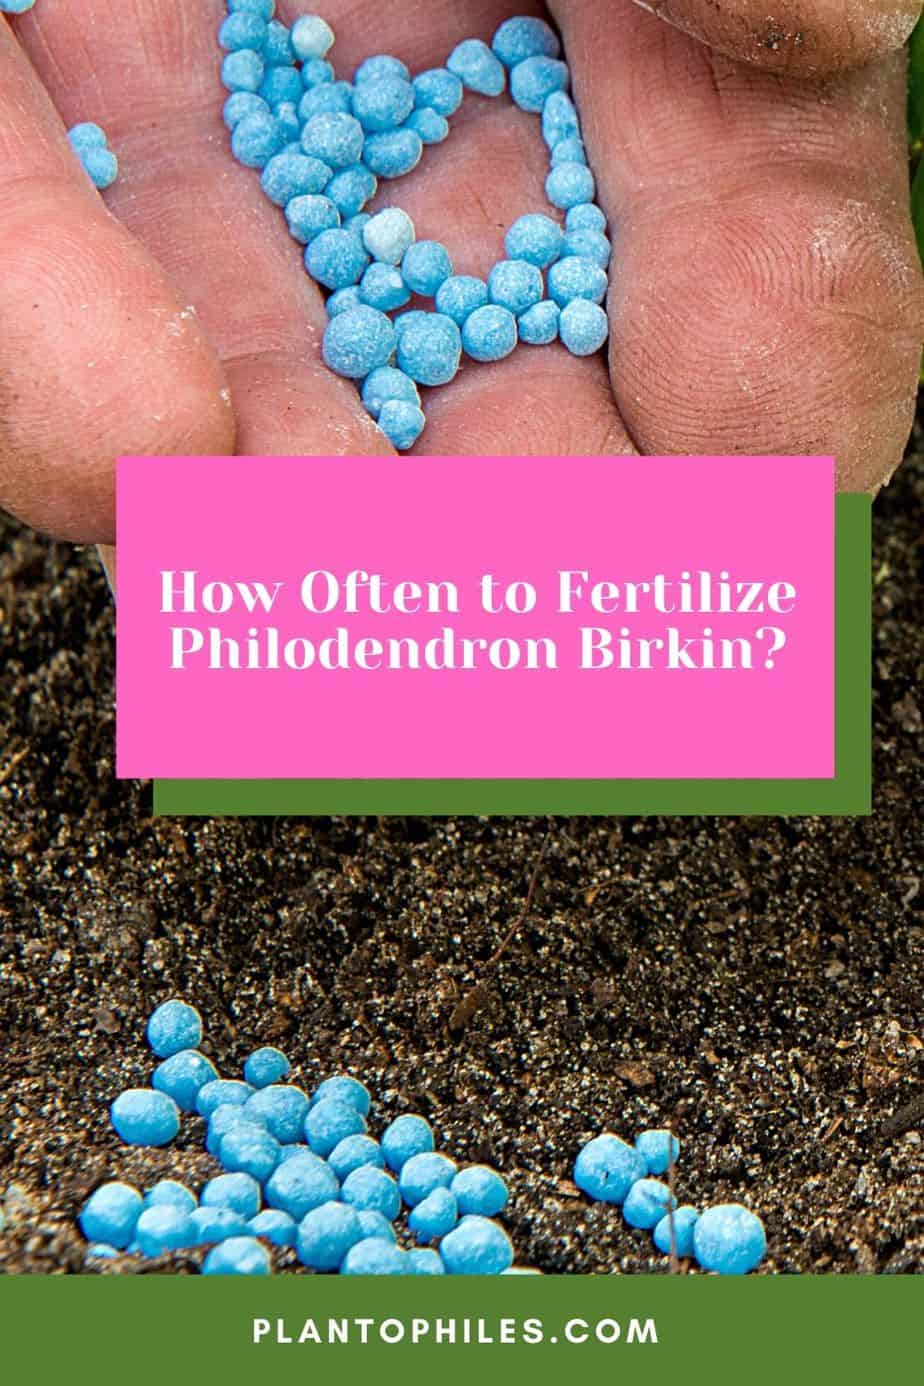 How Often to Fertilize Philodendron Birkin